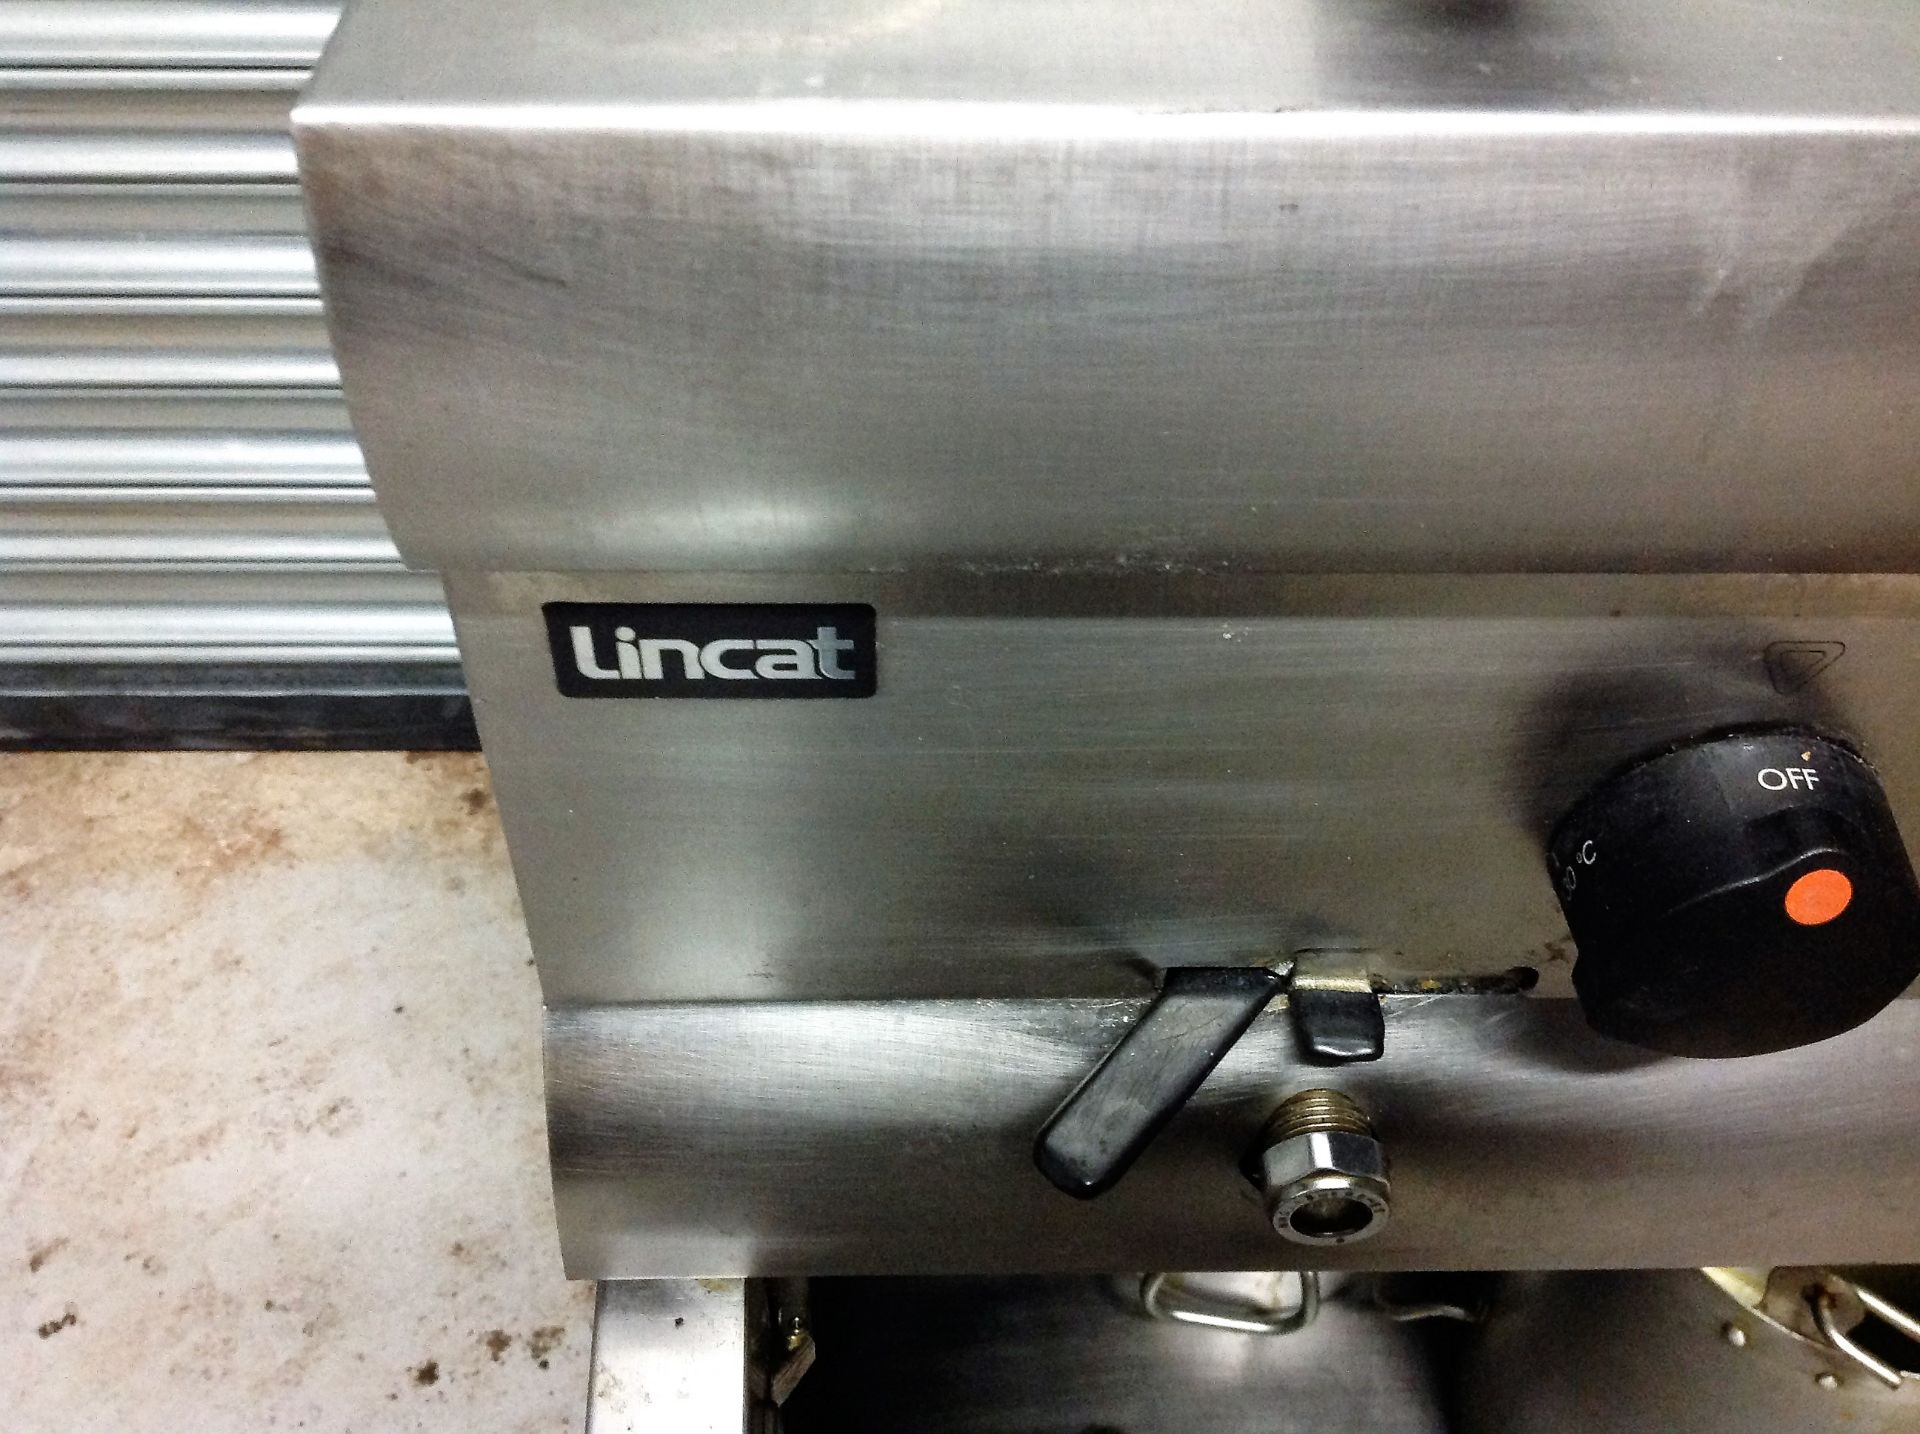 Lincat Stainless Steel Double Deep Fat Fryer With Under Cupboard And Oil Bucket/Nozzle - Image 4 of 6